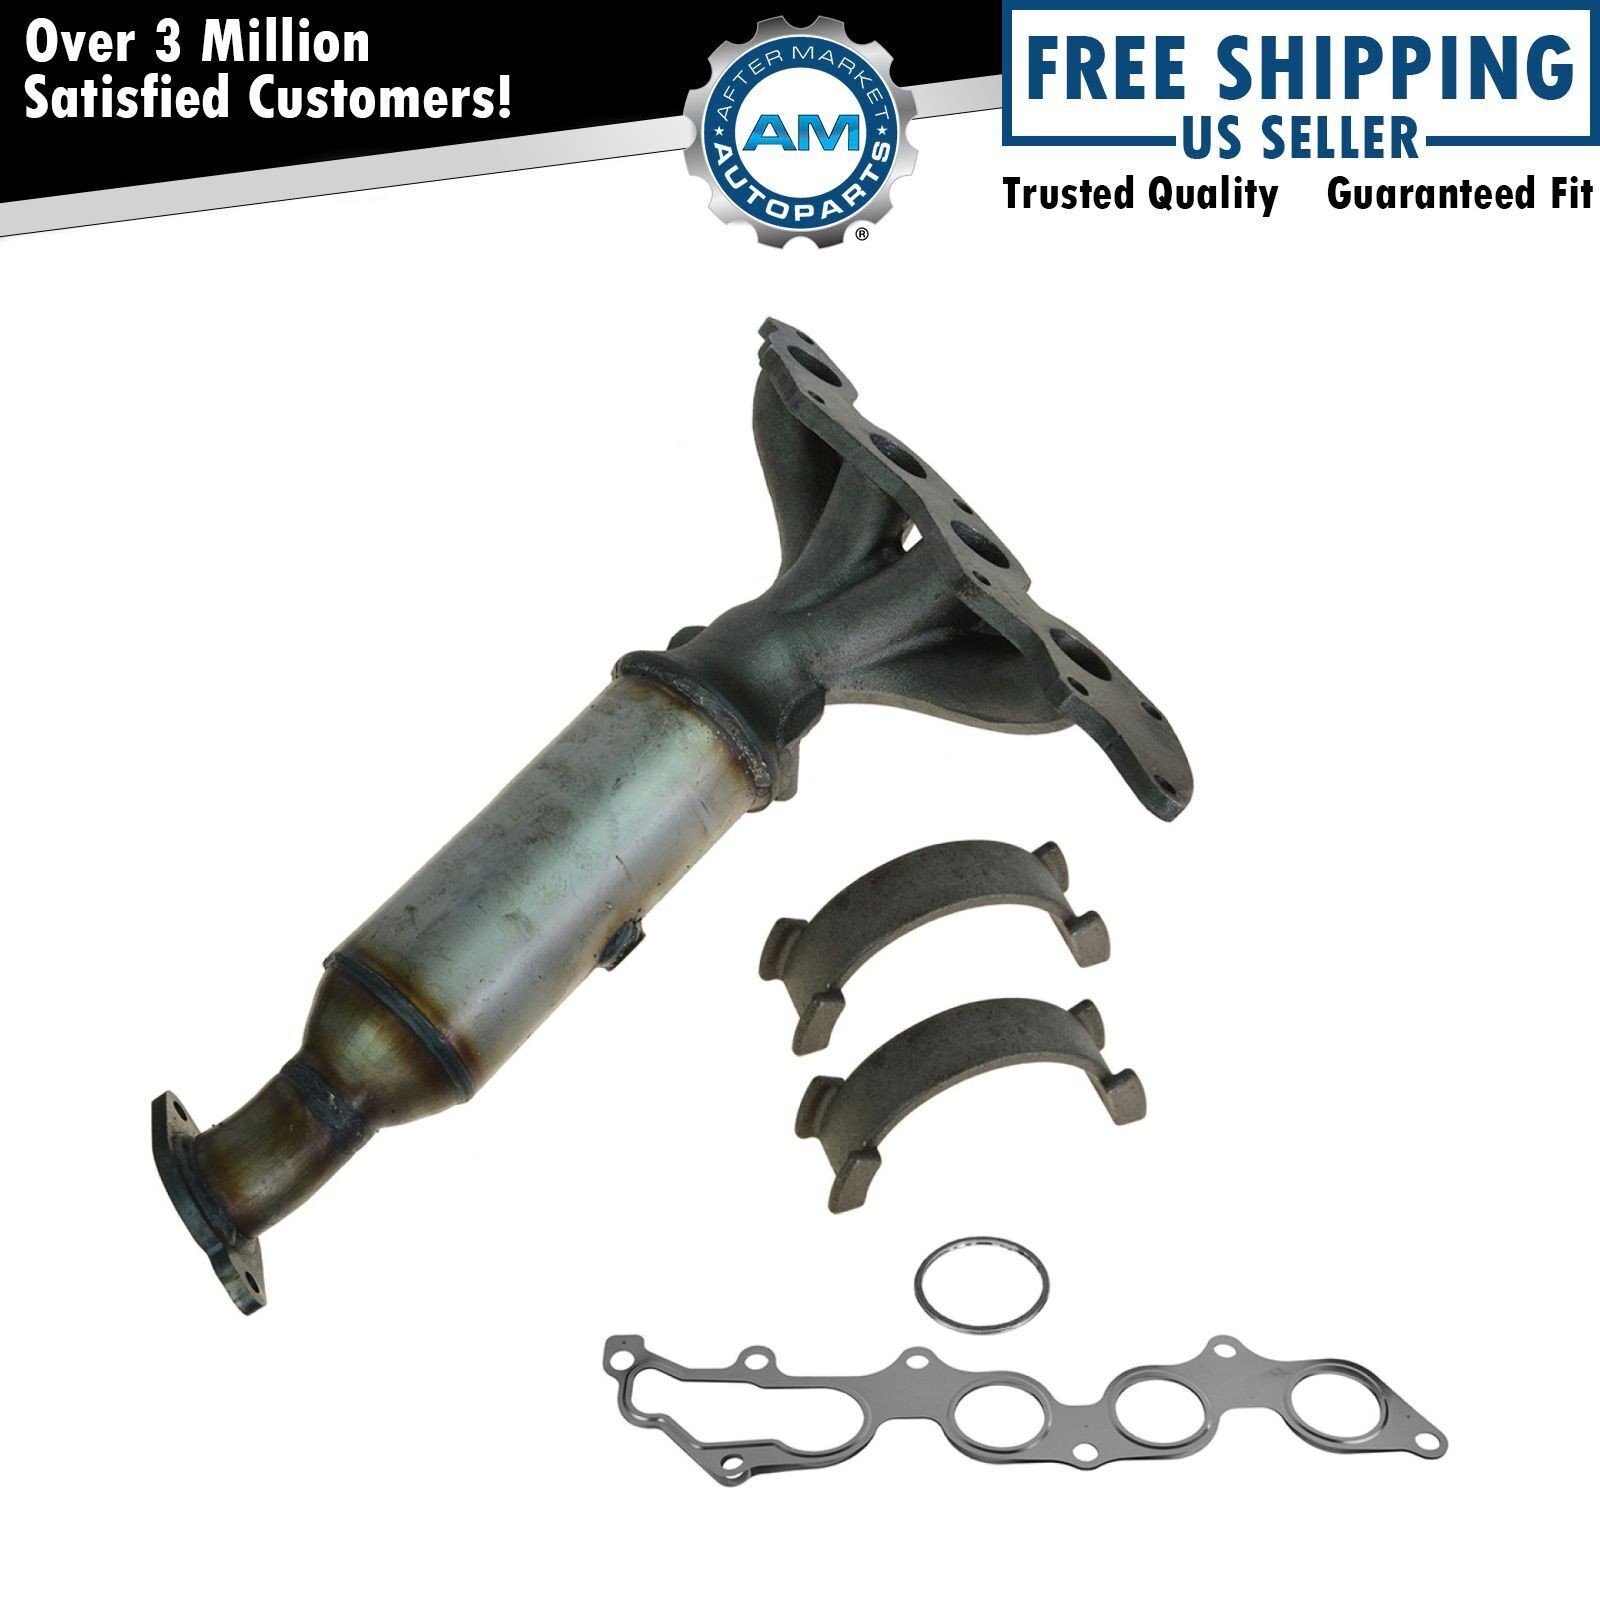 Exhaust Manifold Catalytic Converter for Fusion Milan 2.3L Federal Emissions